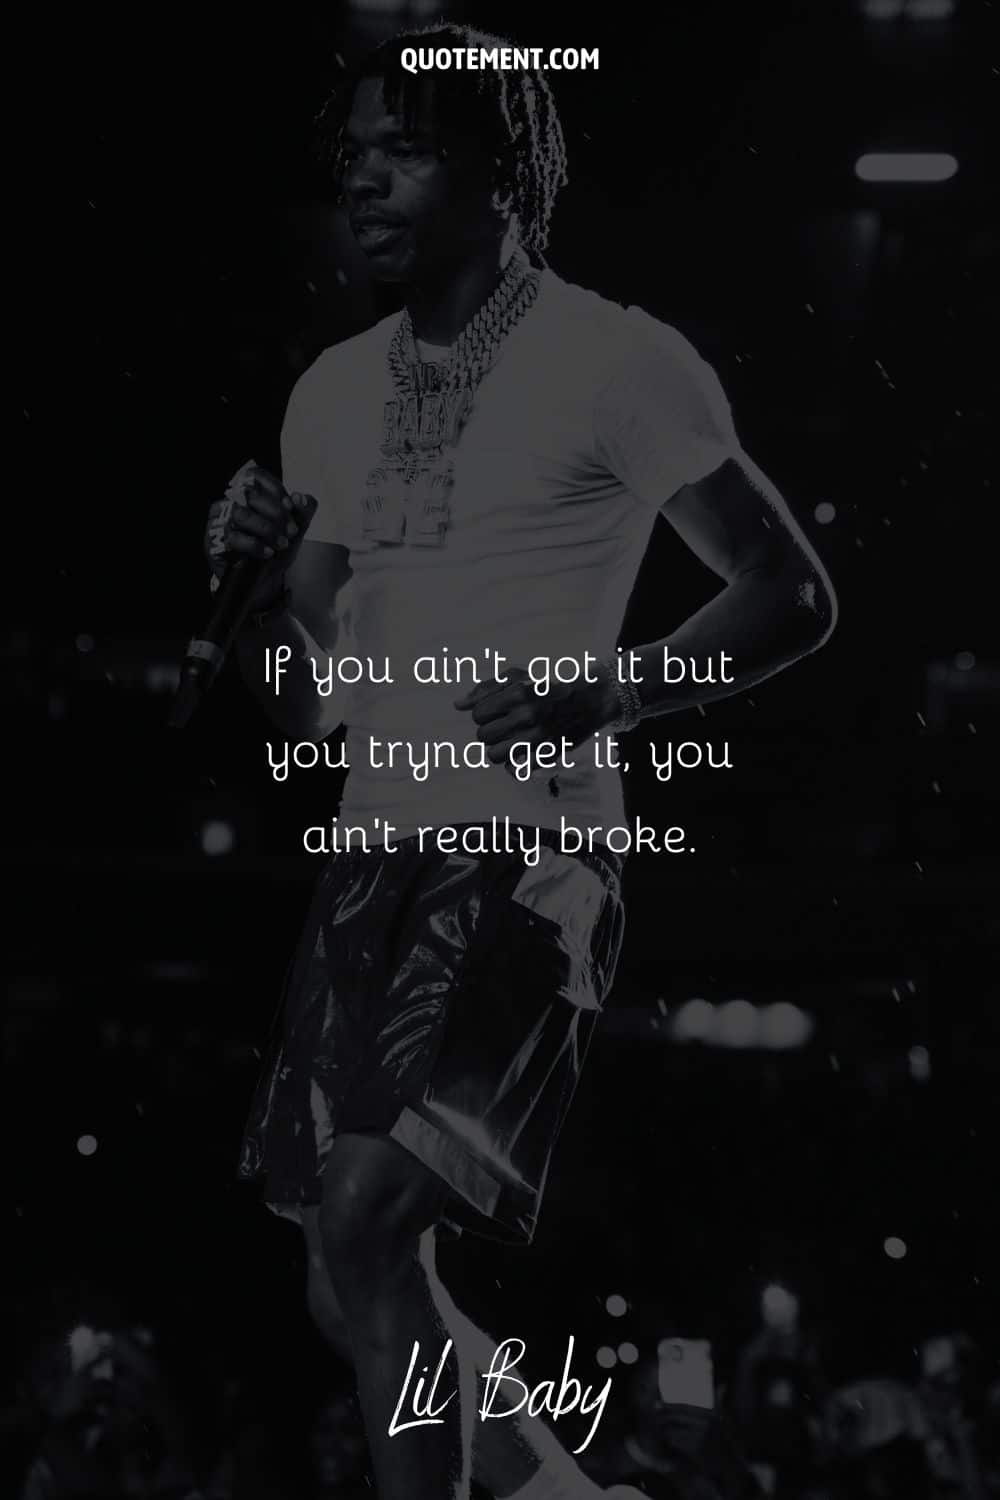 rapper image representing lil baby motivational quote